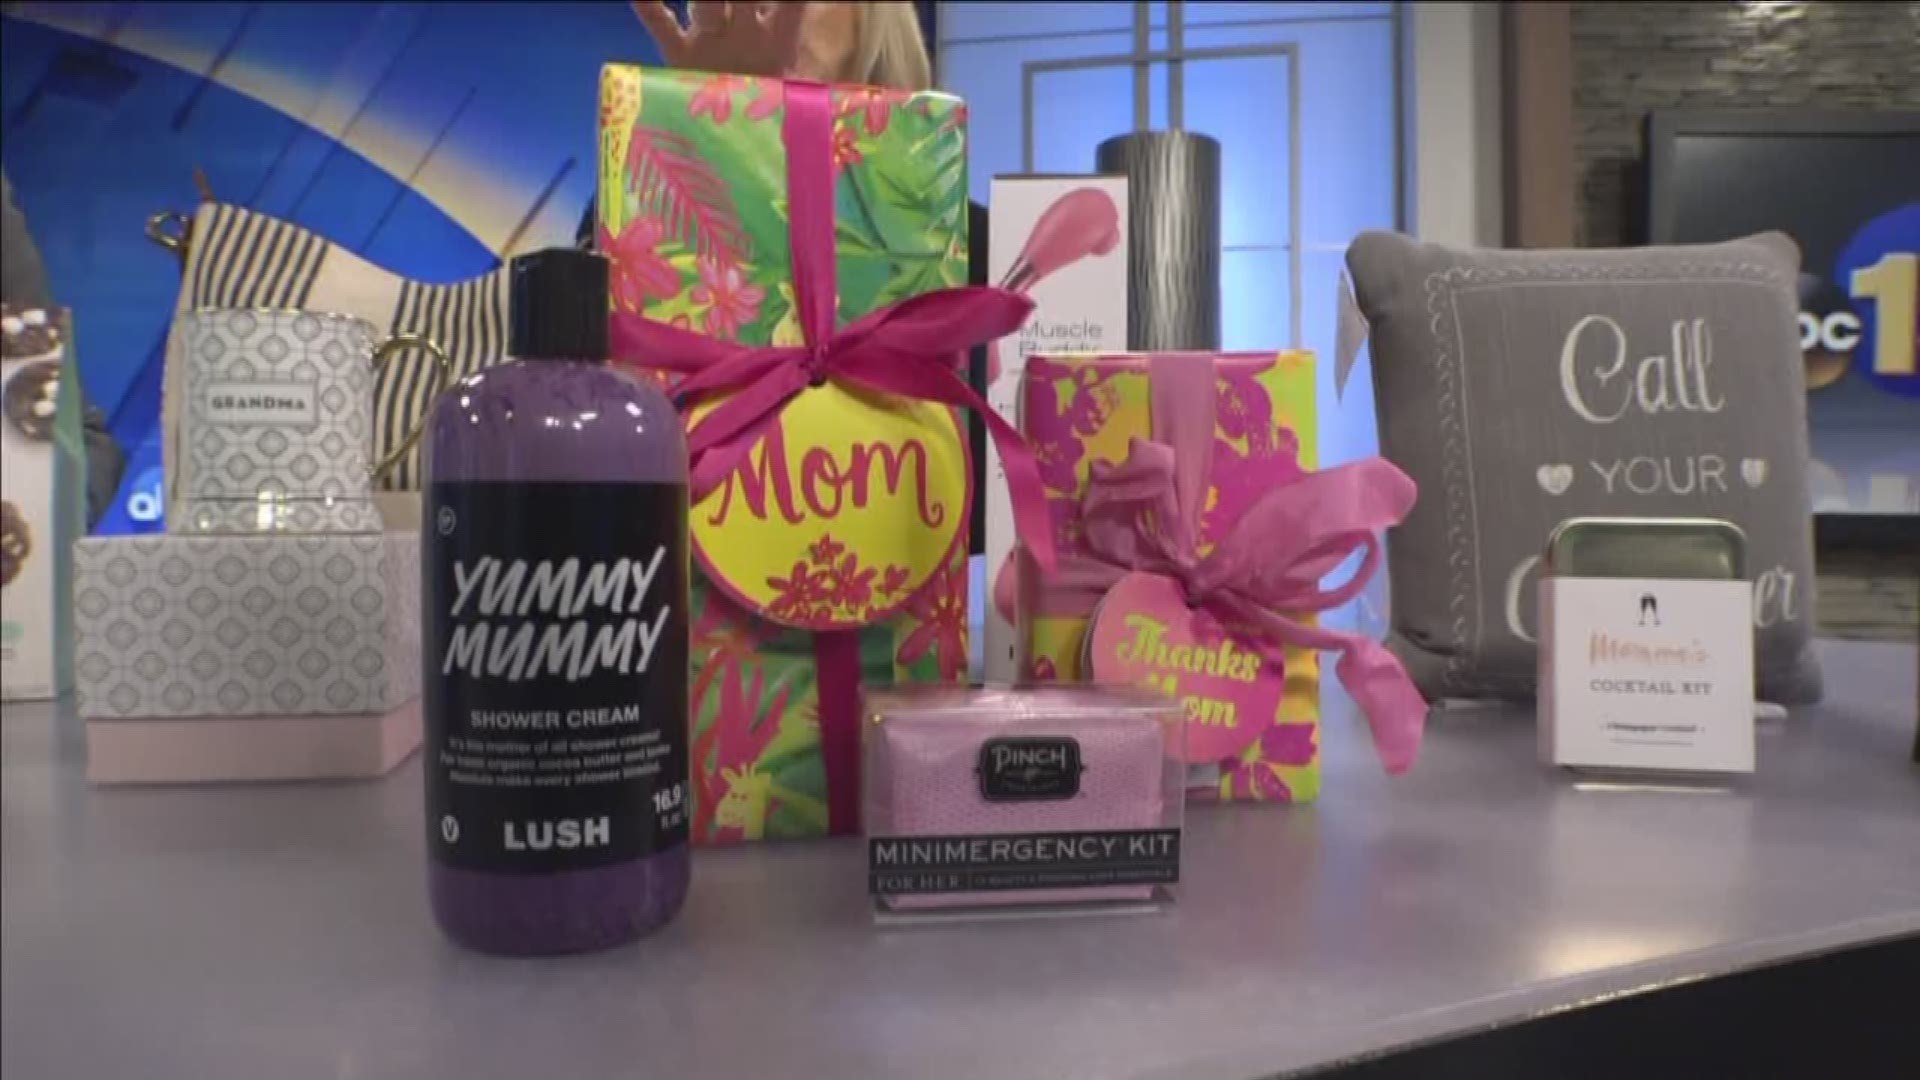 INTERVIEW: Last-minute Mother's Day gifts from MacArthur Center